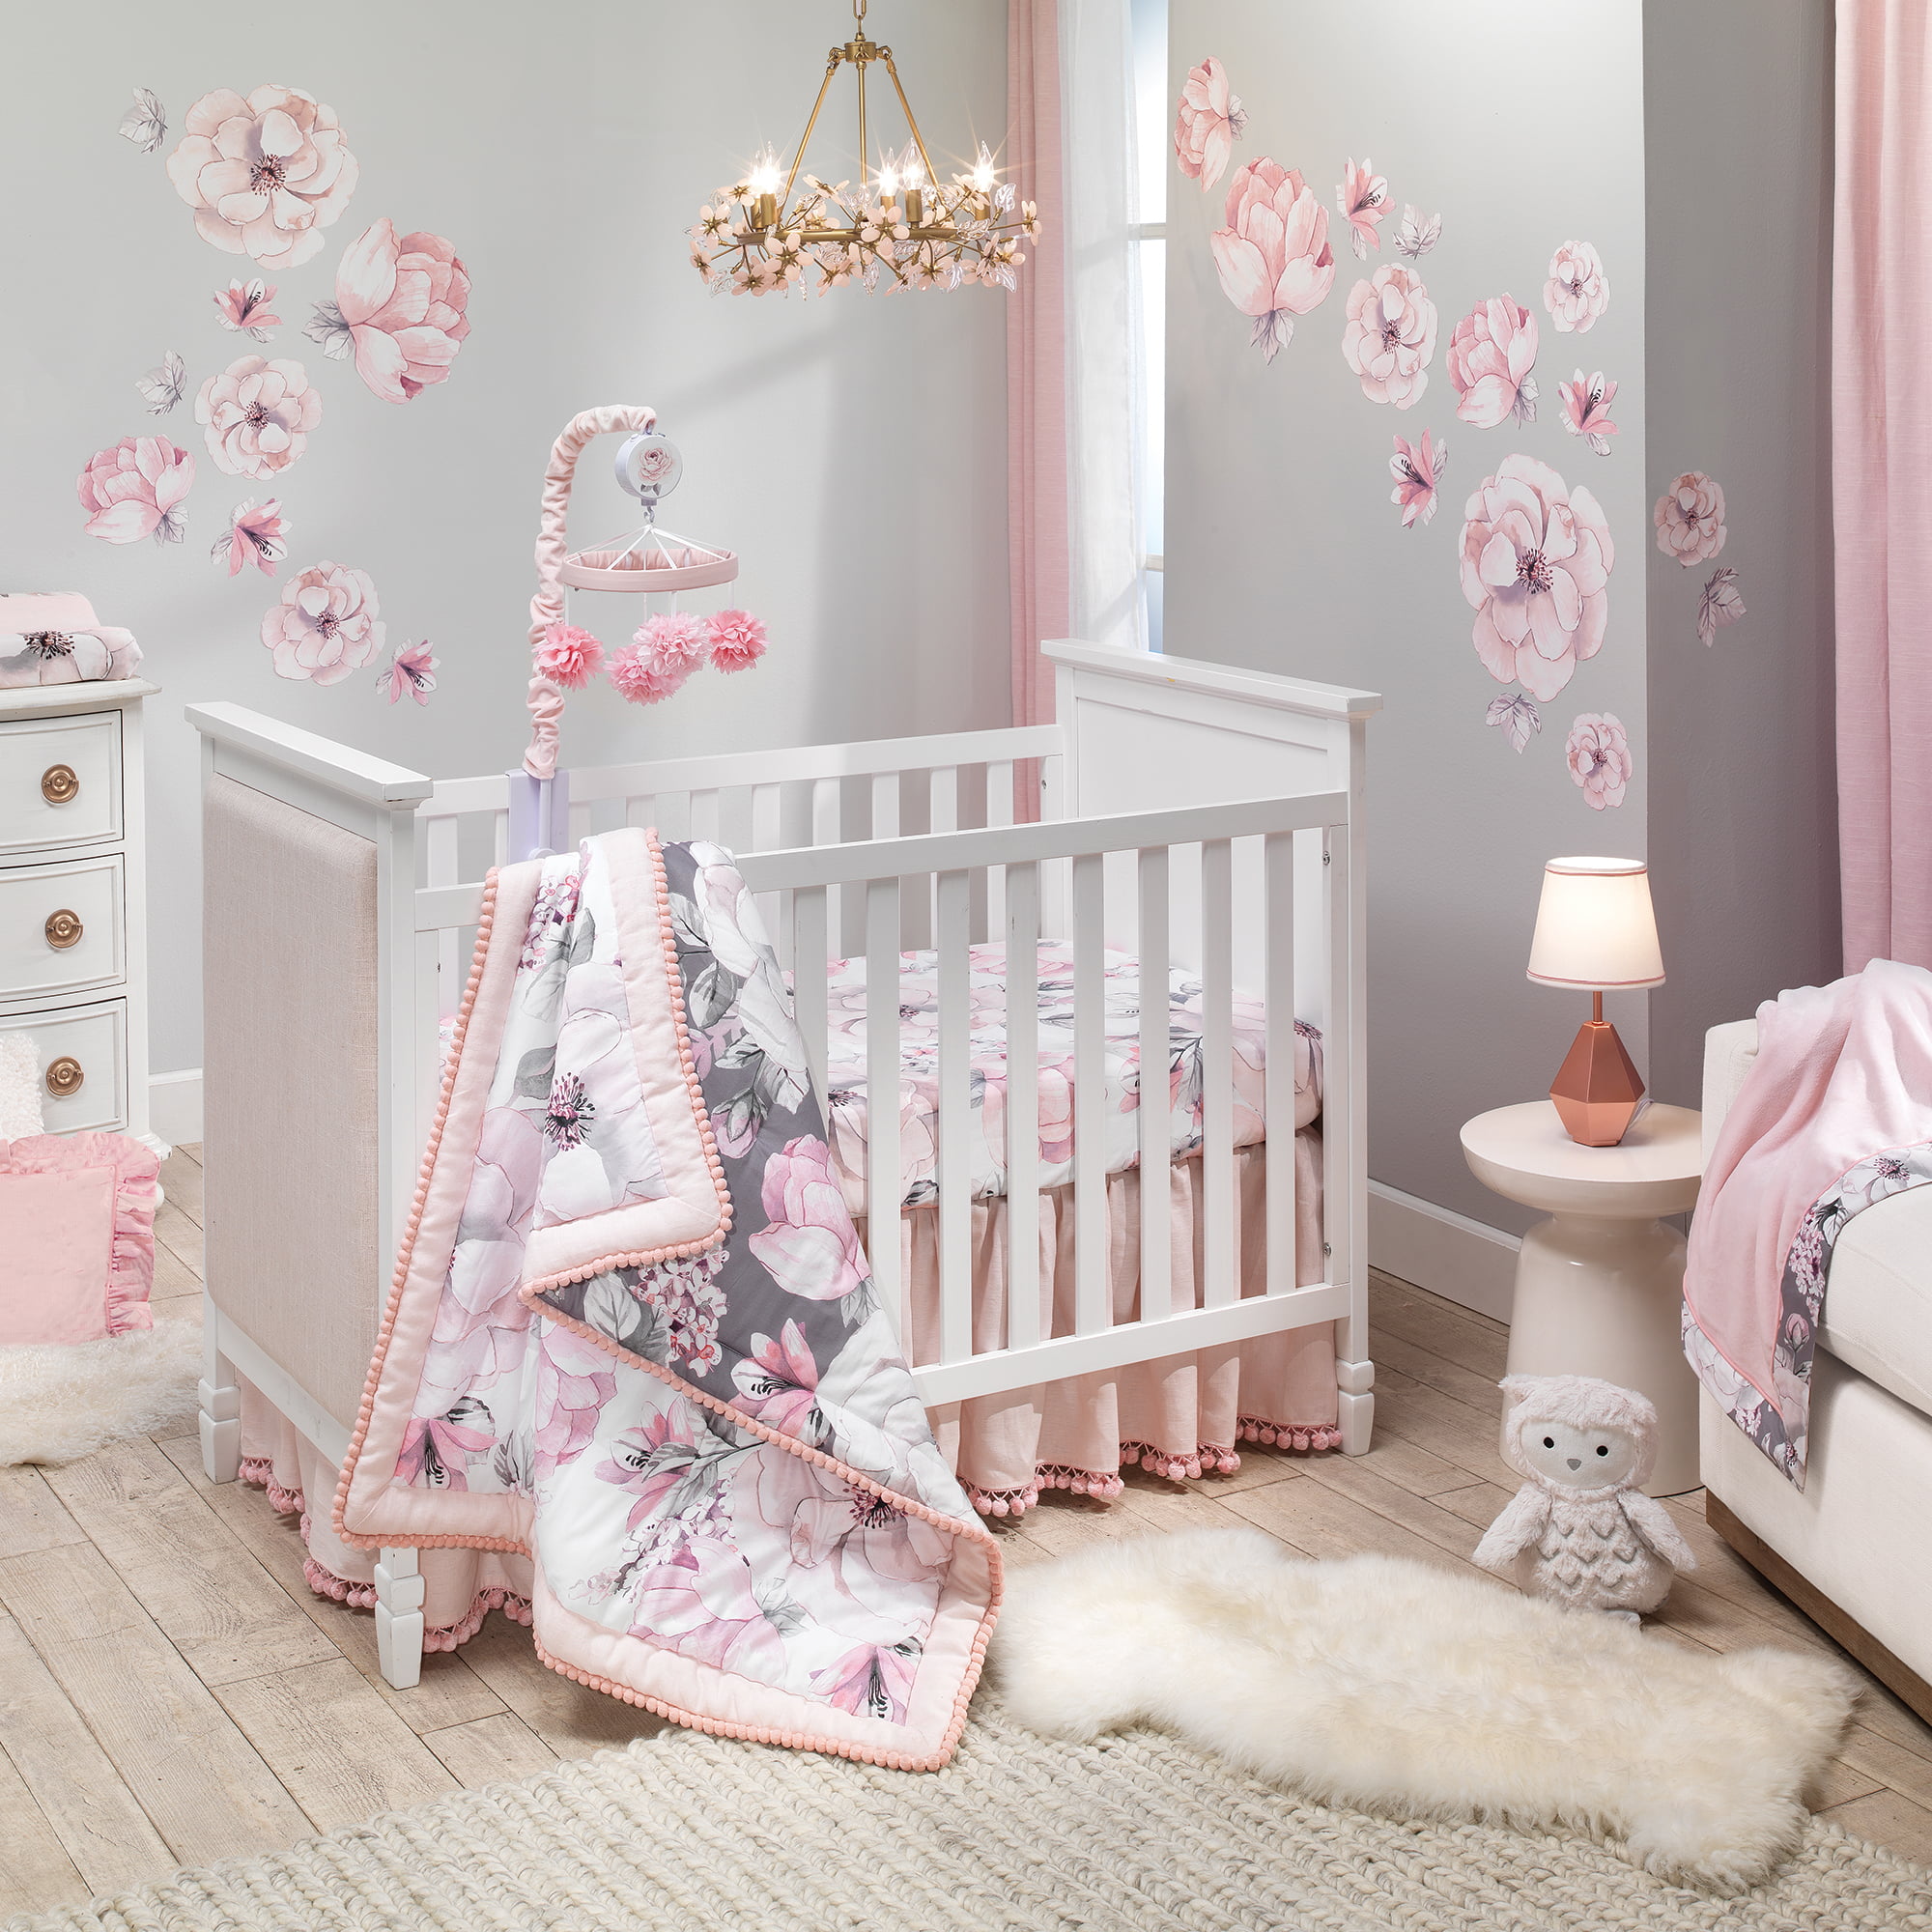 Pink Butterfly Nursery Crib Bedding Set for Baby Girl 6 PCs Set Baby Bedding Set Hand Sew-on//Embroidered Crib Bedding Set Baby Girl Gift Idea